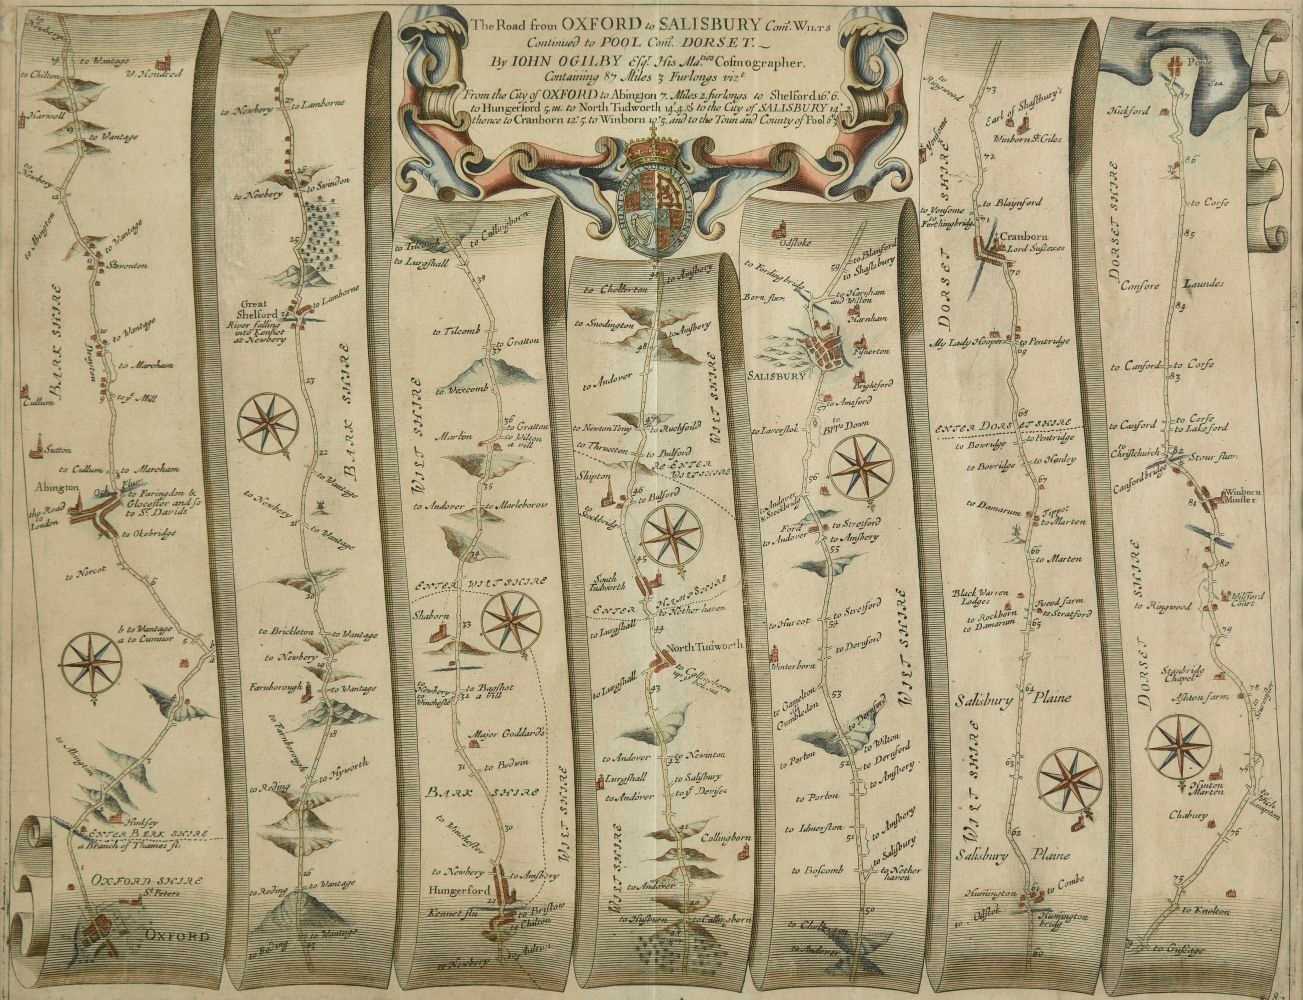 Lot 126 - Ogilby (John). The Road from Oxford to Salisbury com. Wilts..., circa 1676